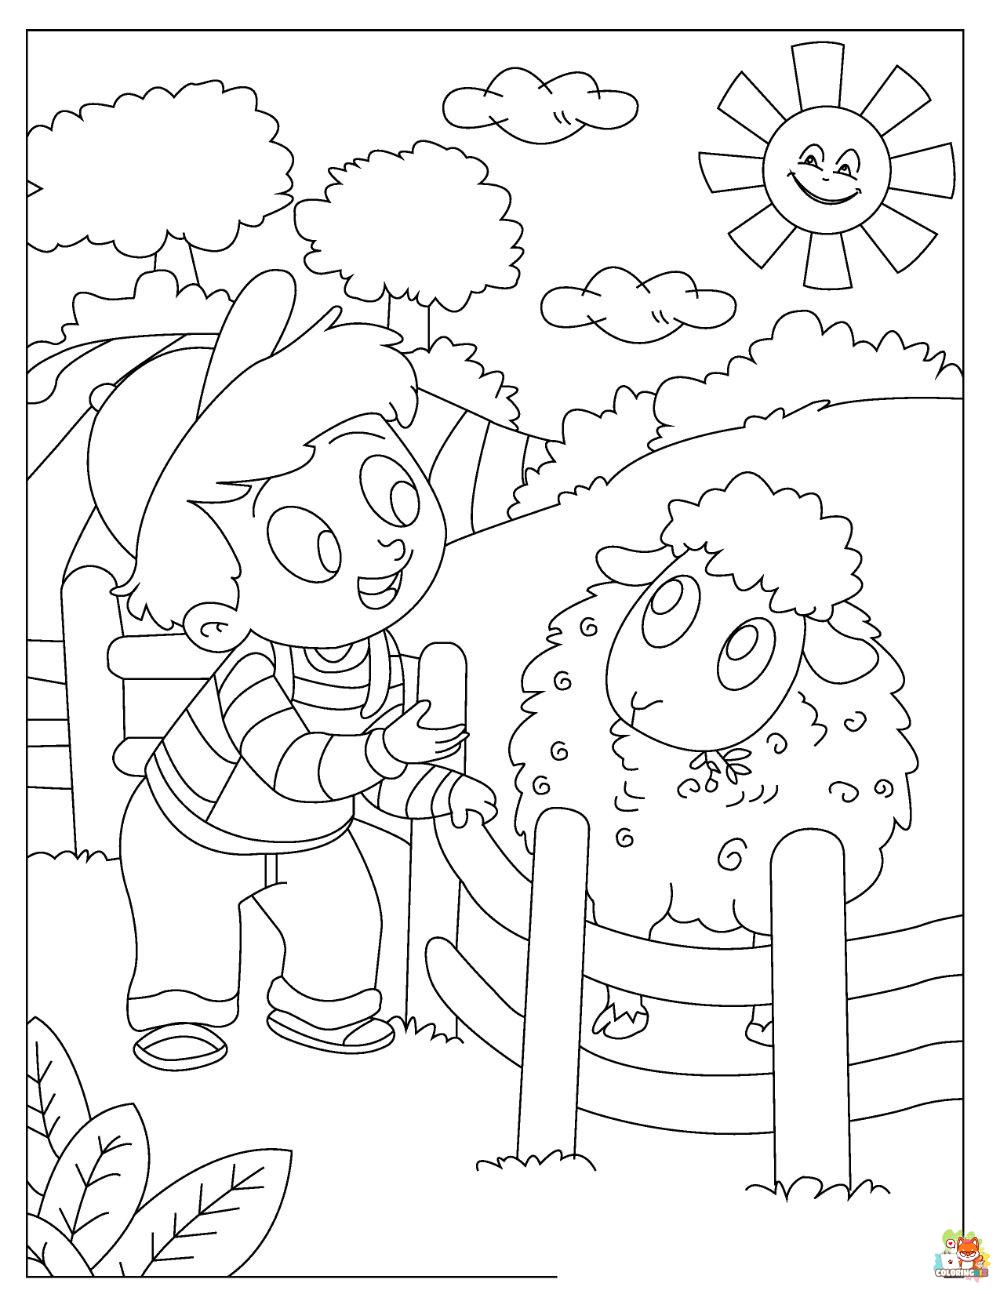 Sheep coloring pages printable 2